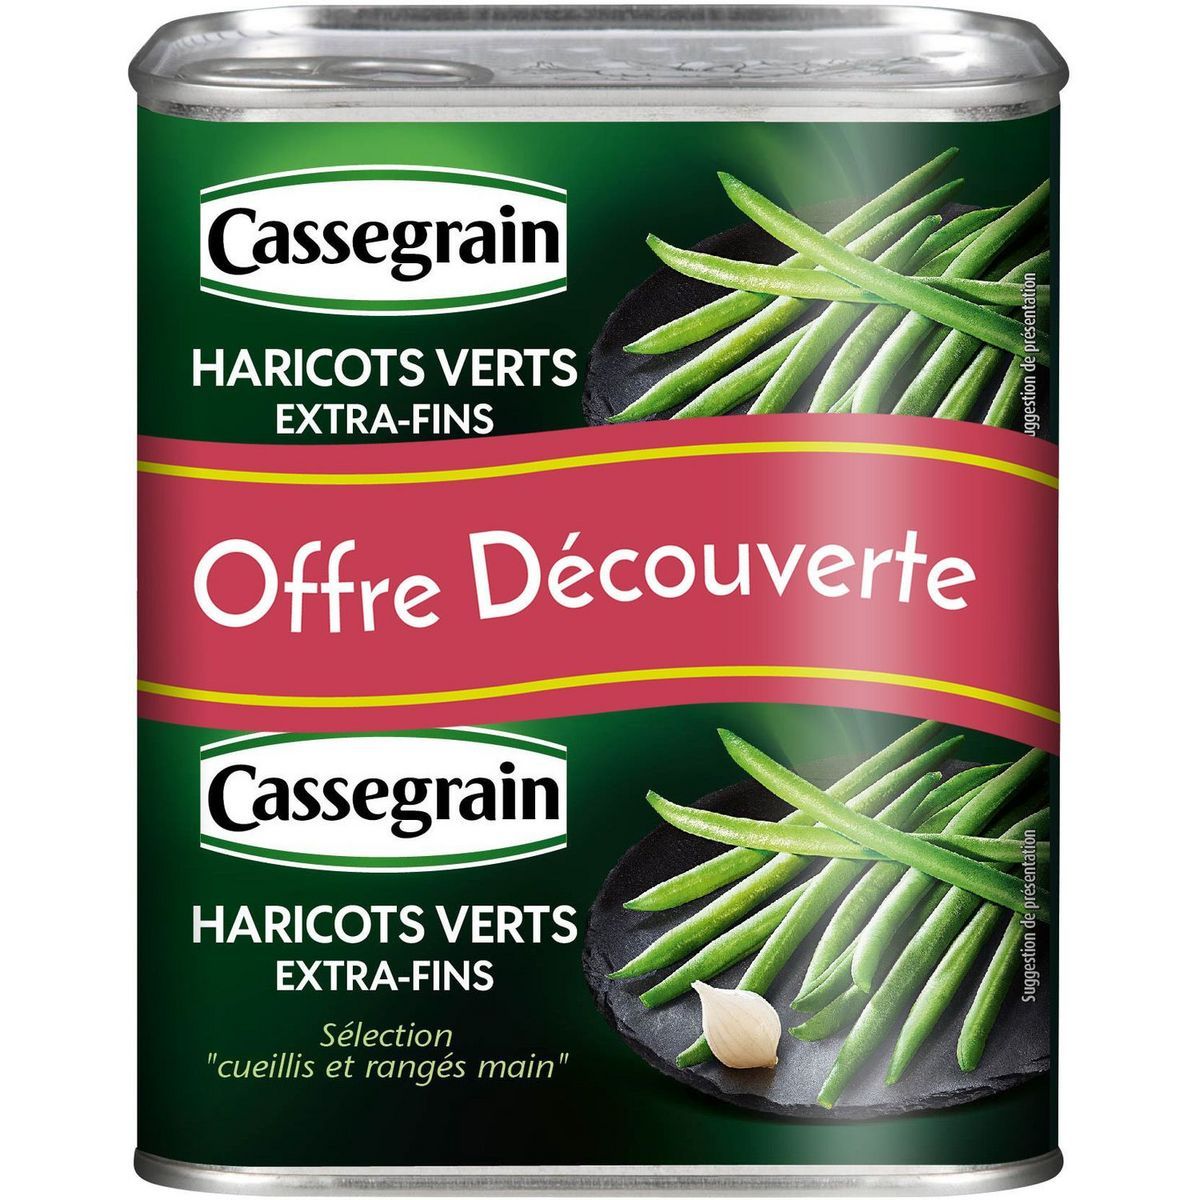 HARICOTS  VERTS EXTRAFINS CUEILLIS ET  RANGÉS MAIN  CASSEGRAIN